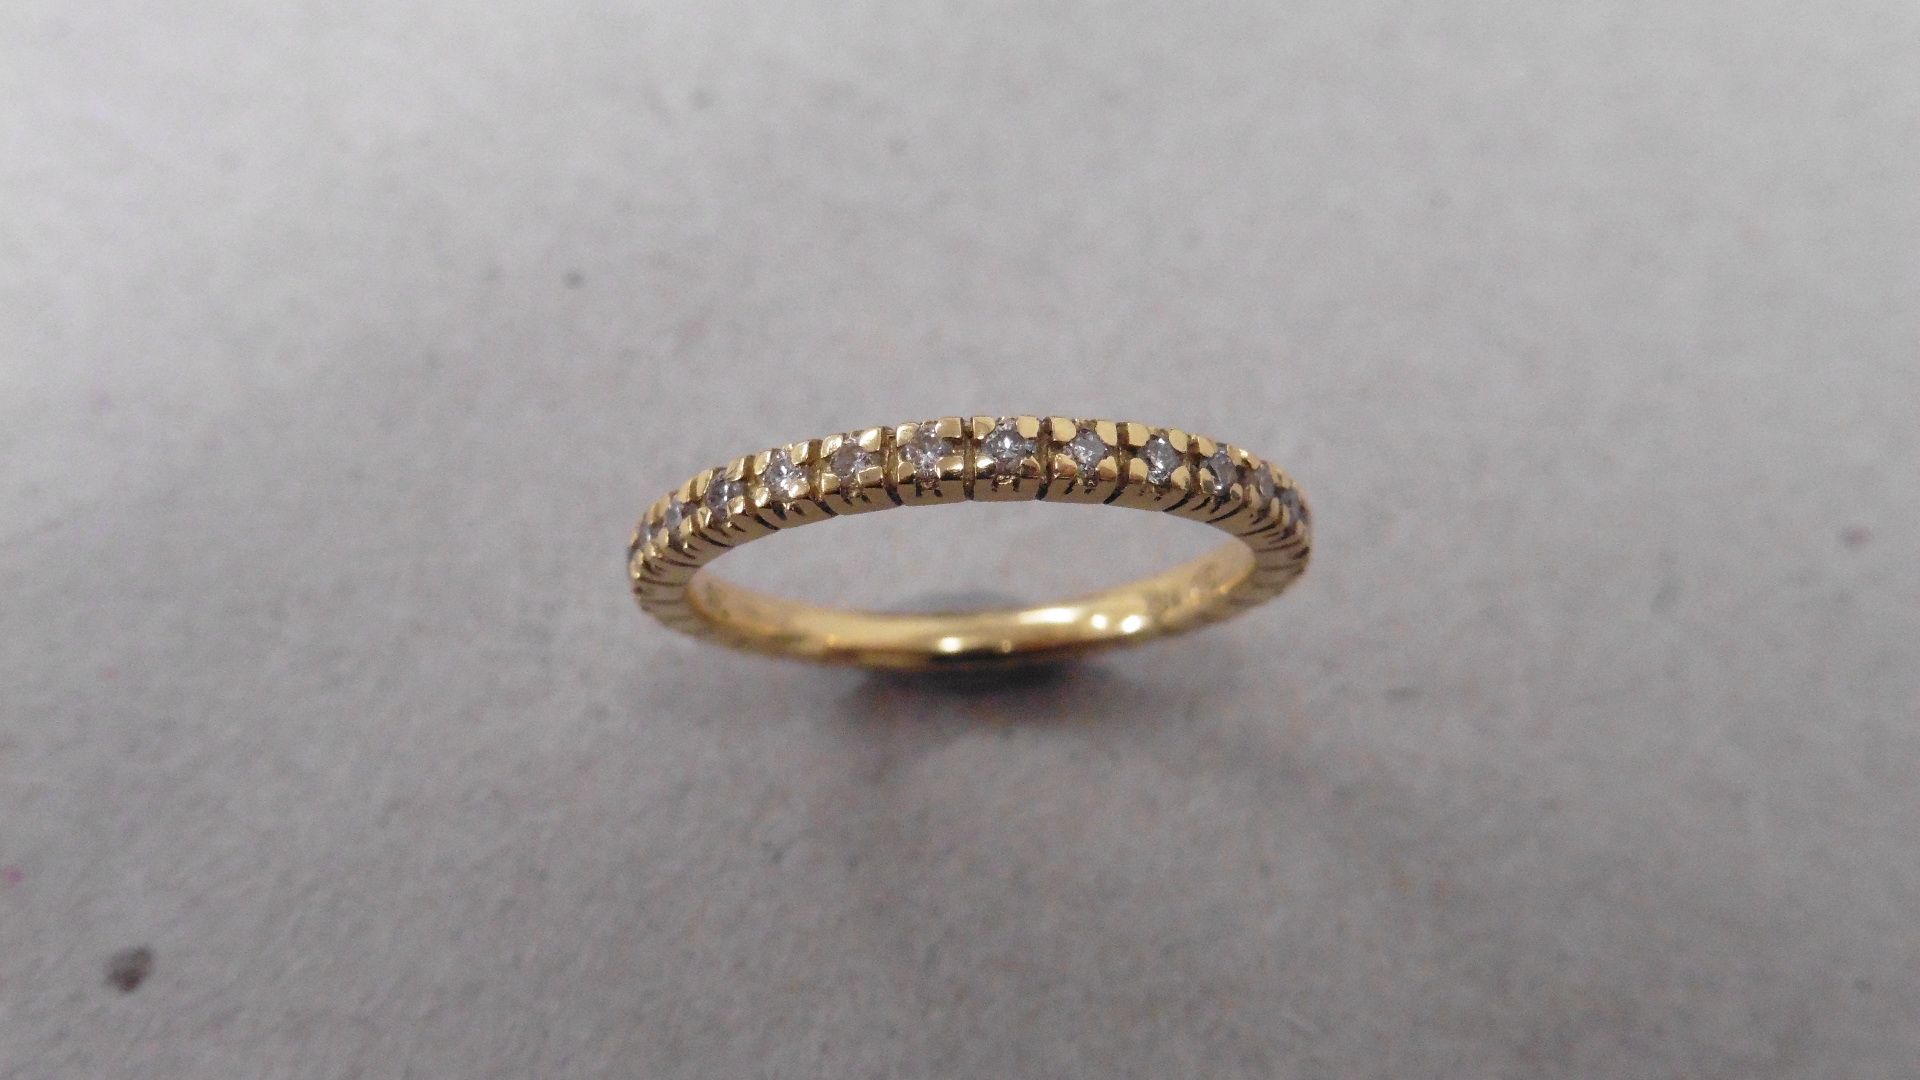 Diamond set band ring set in 18ct yellow gold. Brilliant cut diamonds set all the way round weighing